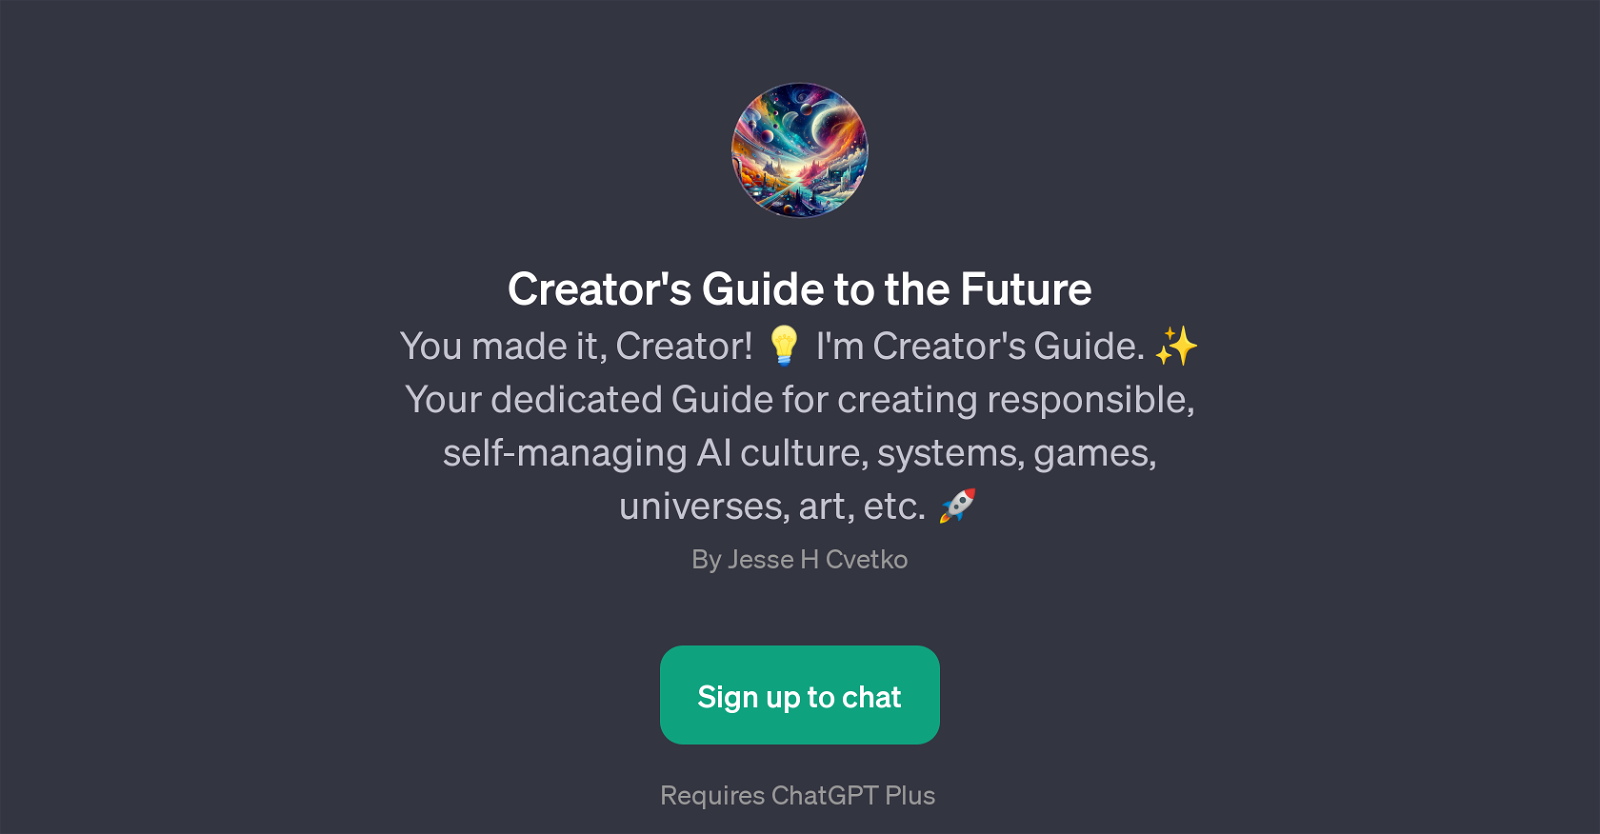 Creator's Guide to the Future website